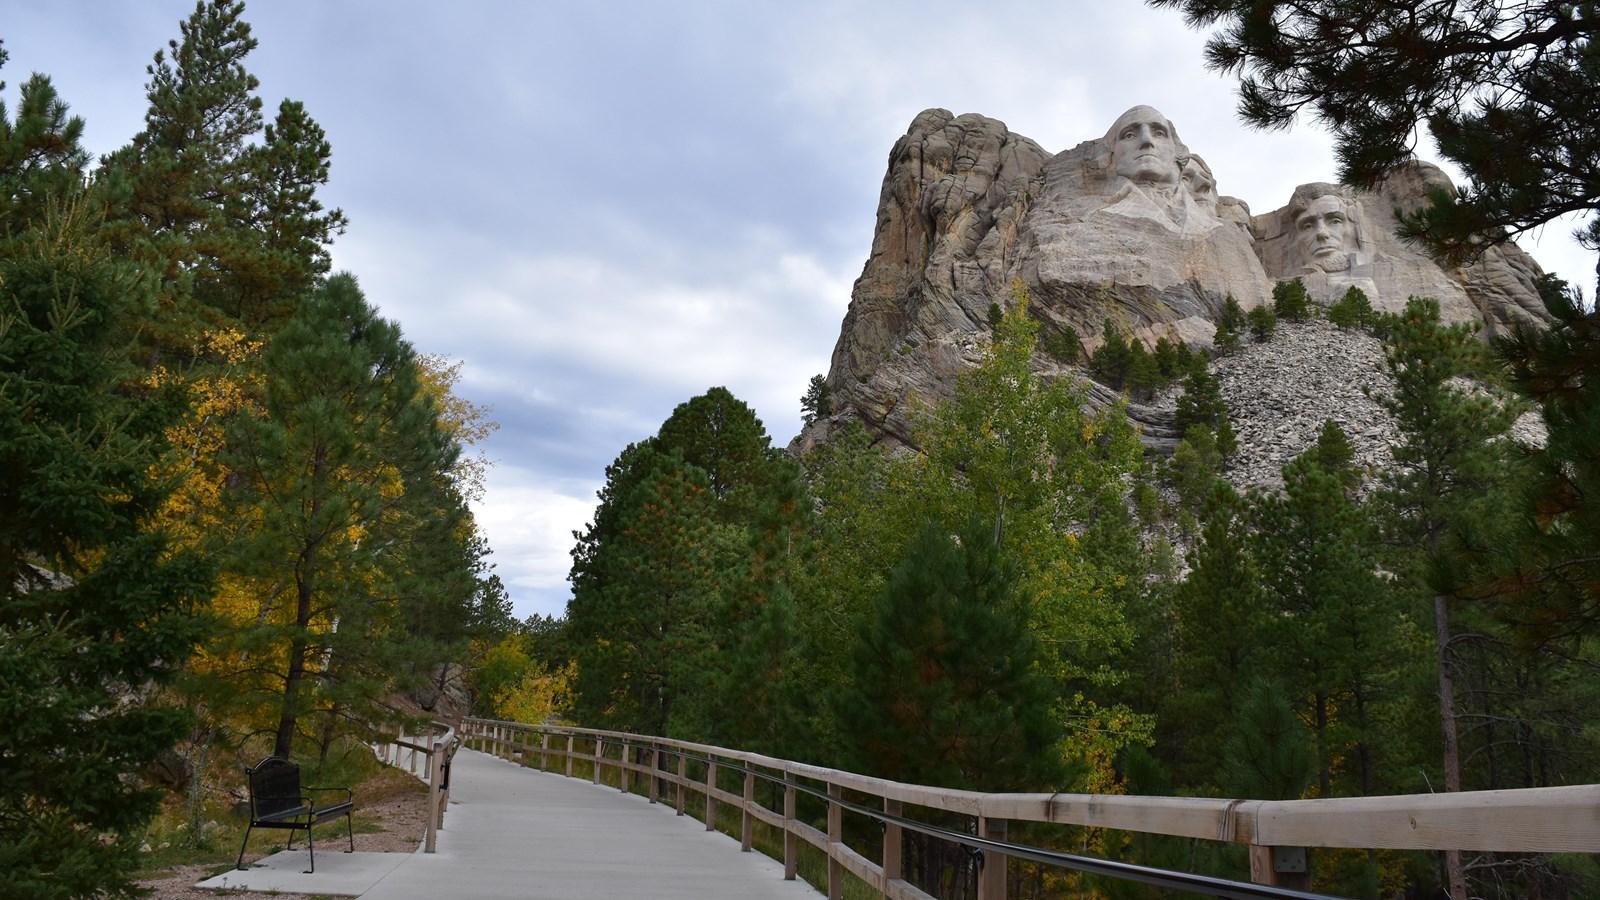 Concrete walkway with trees and Mount Rushmore National Memorial in the background.